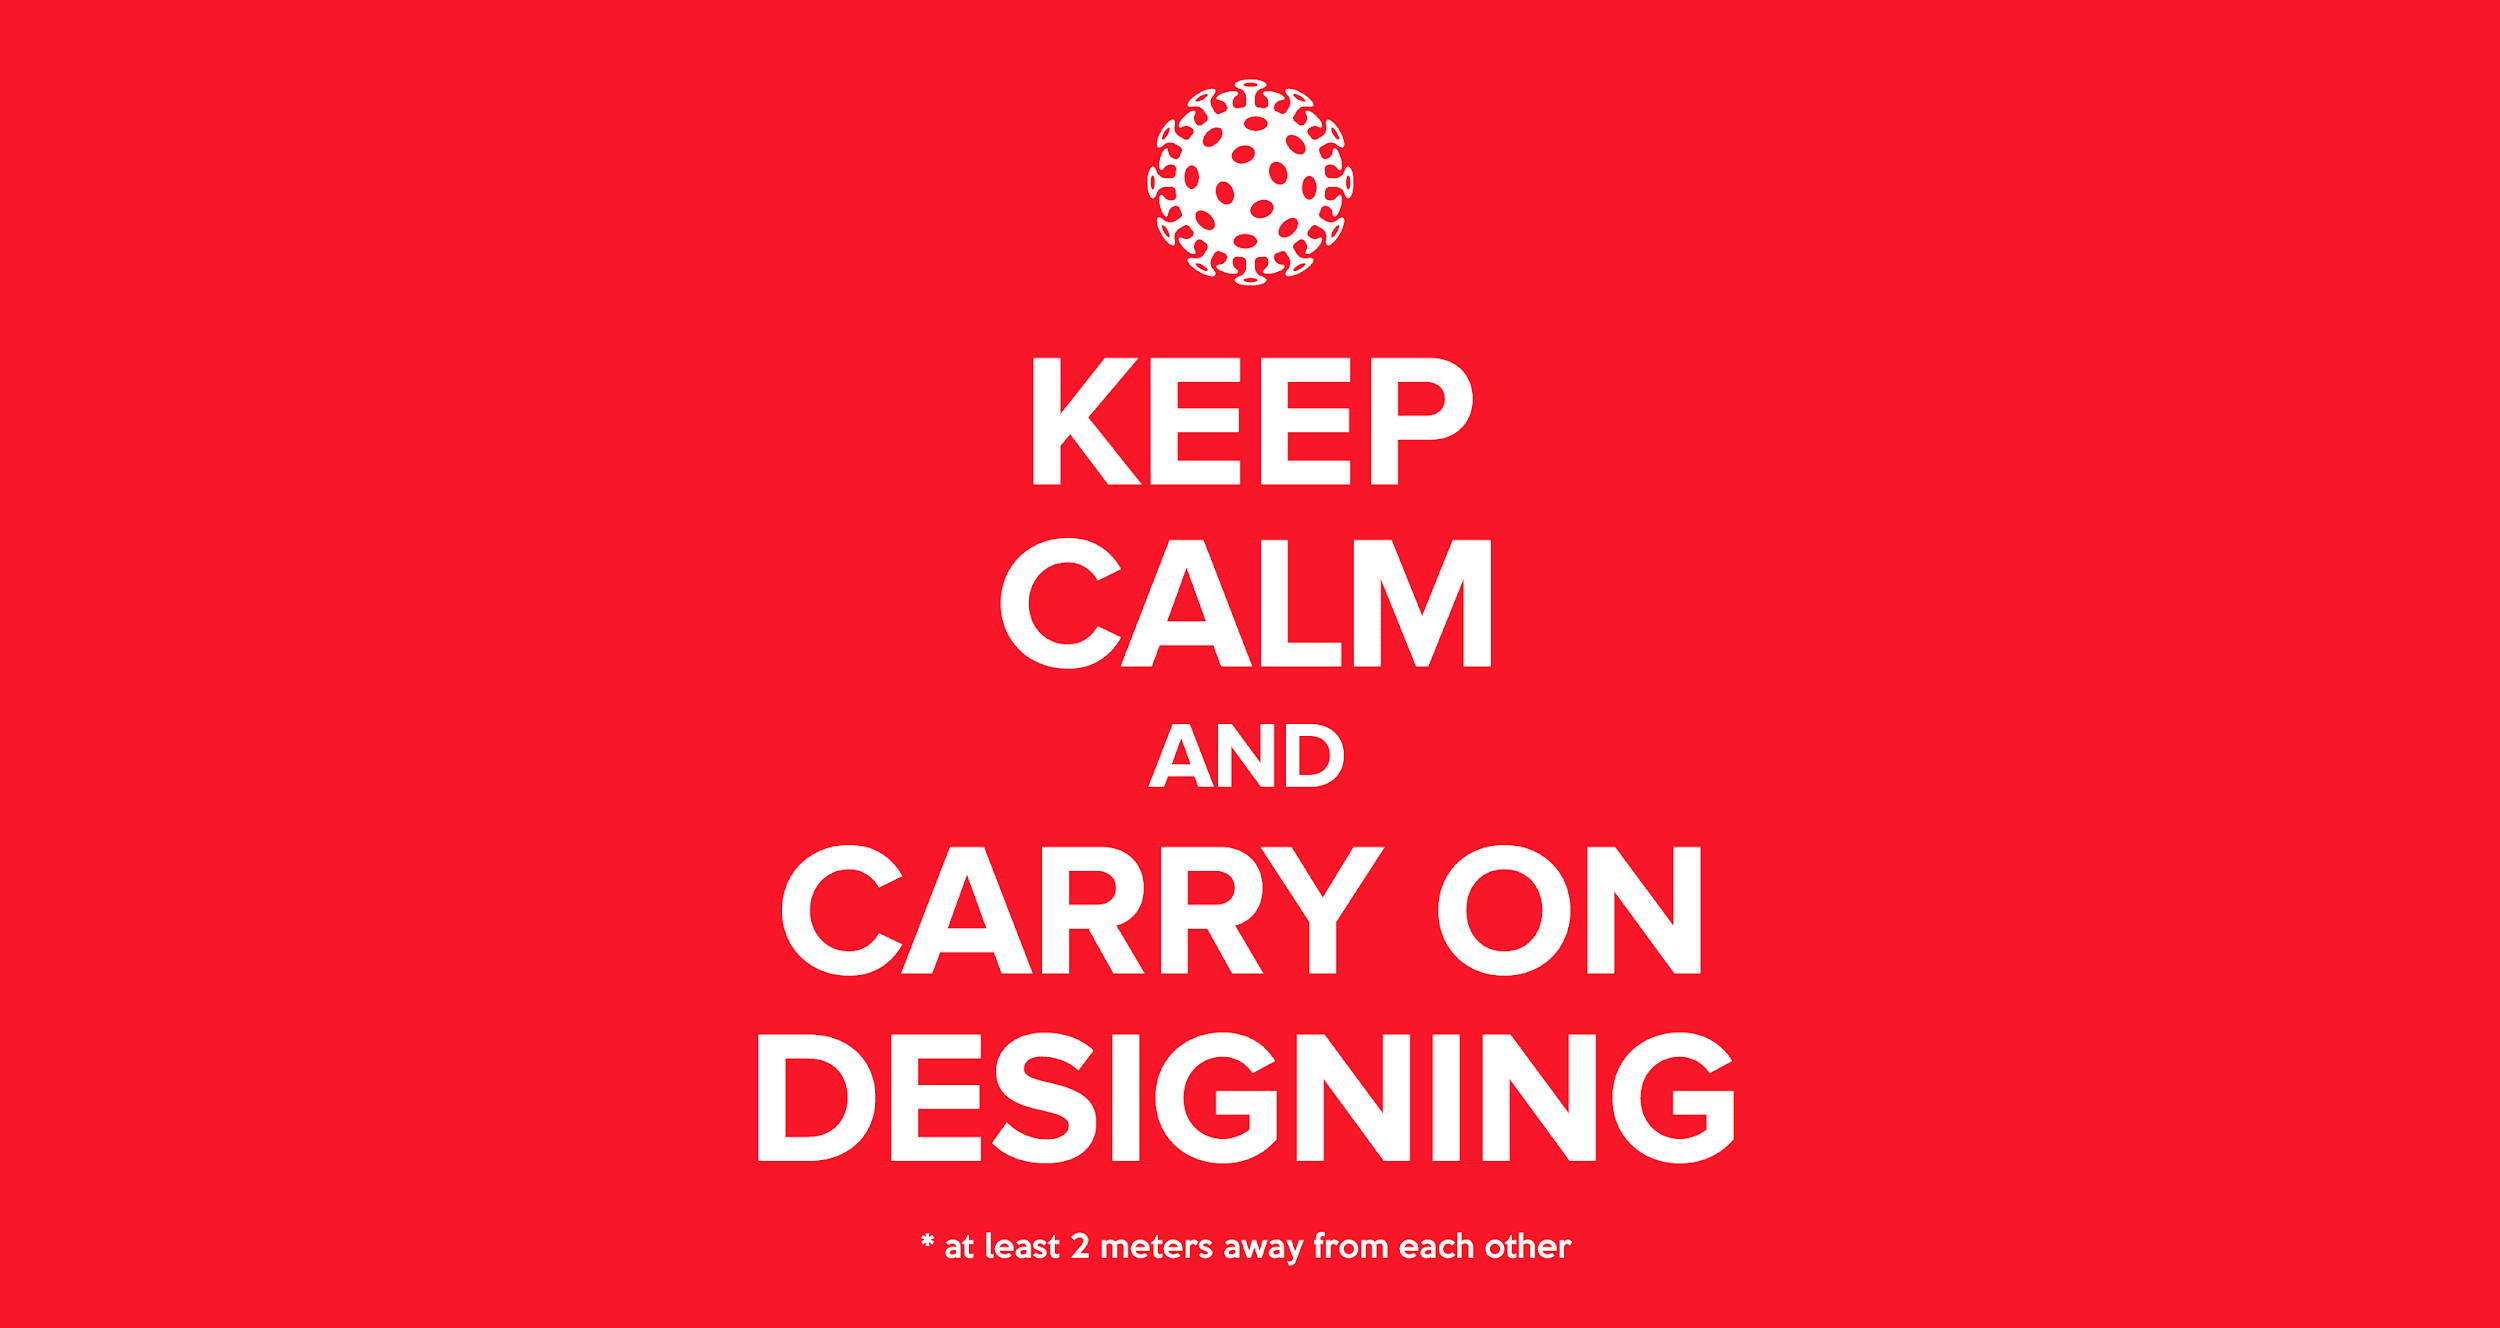 Keep calm and carry on - applying design thinking to the coronavirus pandemic